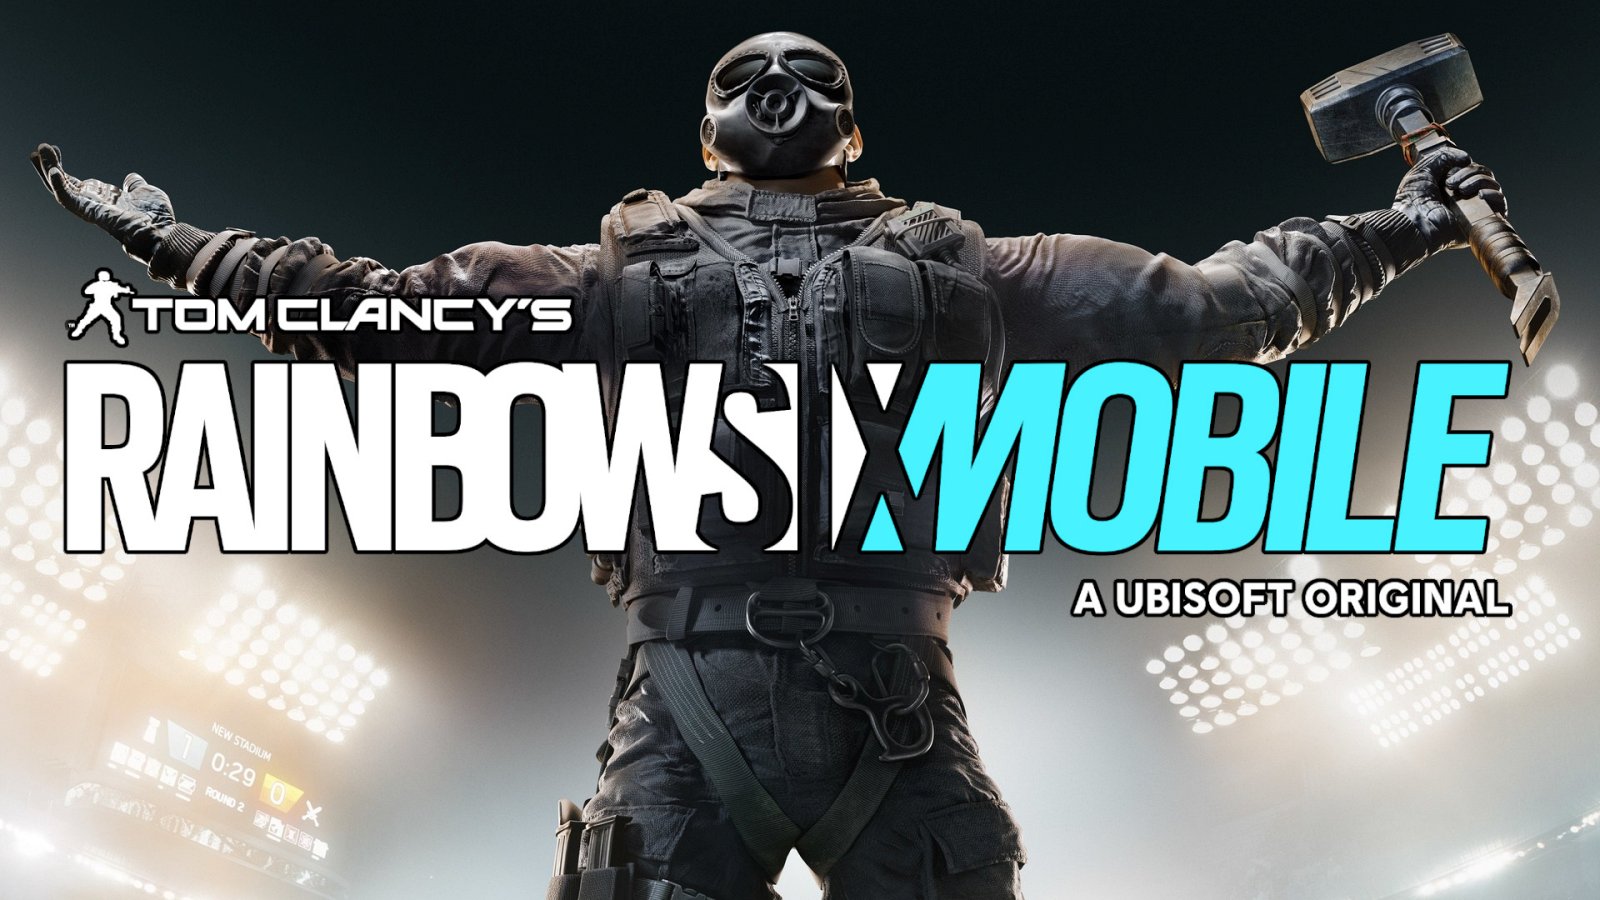 Rainbow Six Mobile para Android - Download